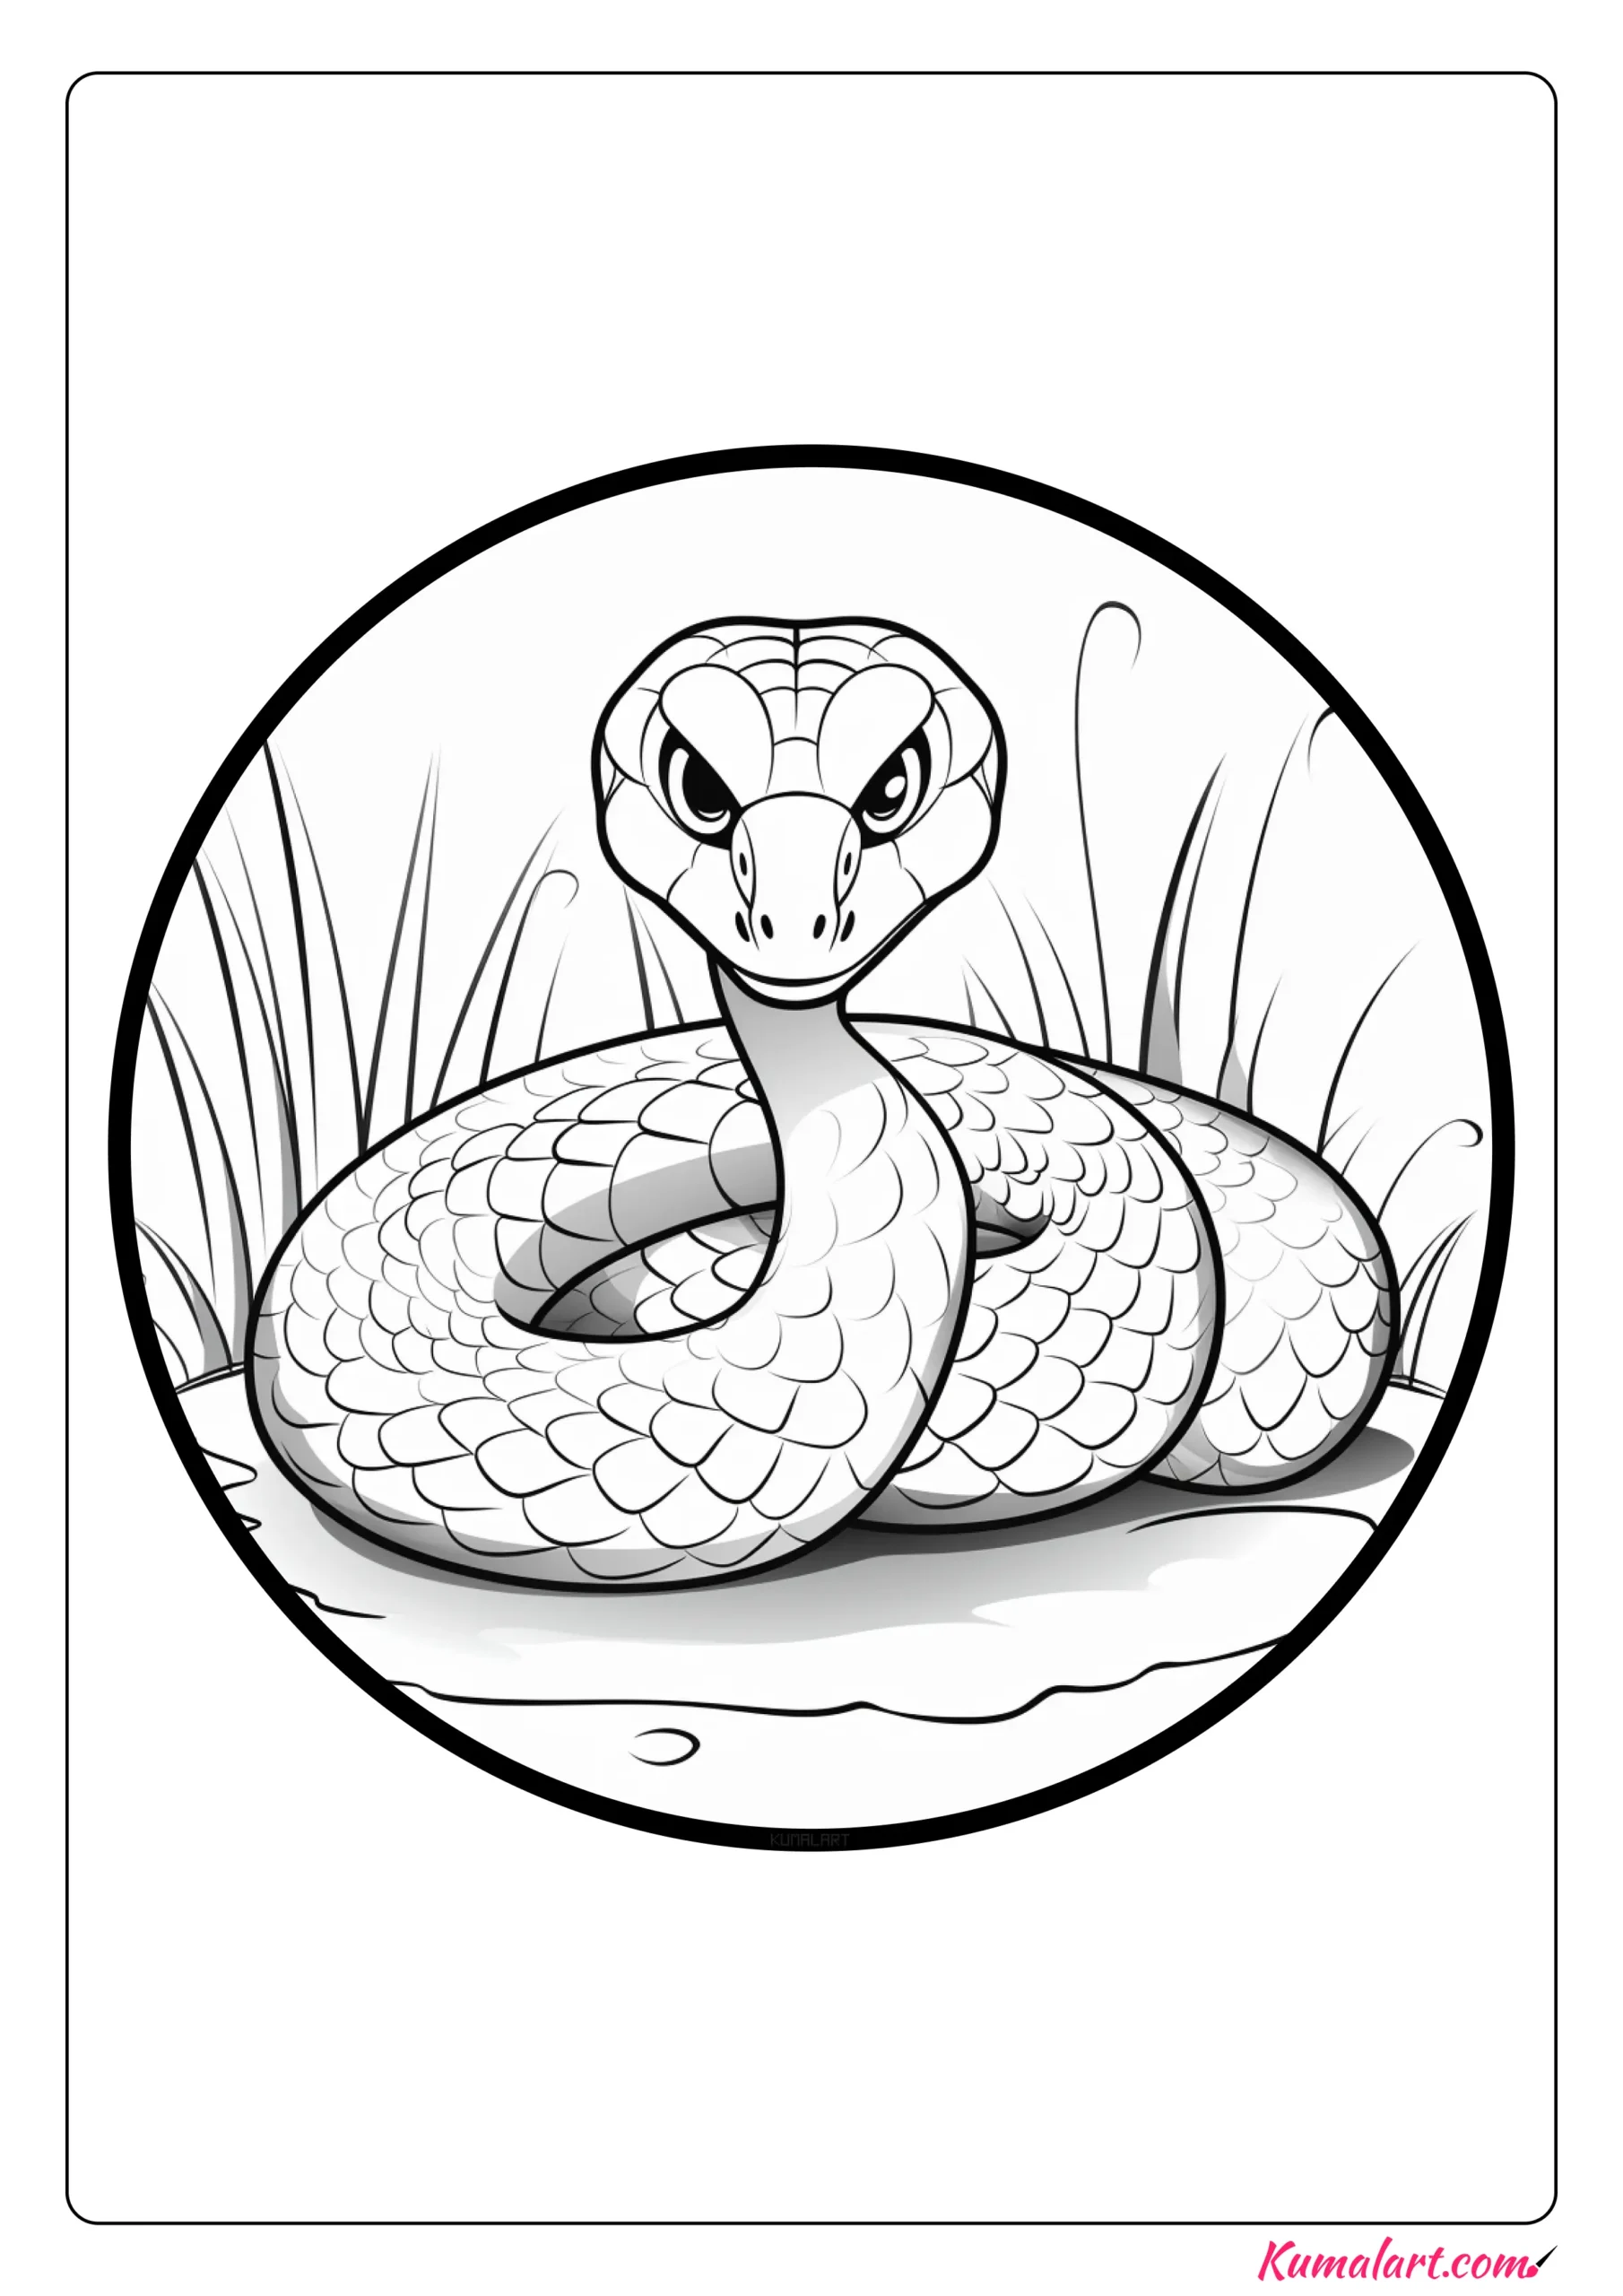 Southwestern Speckled Rattle Snake Coloring Page